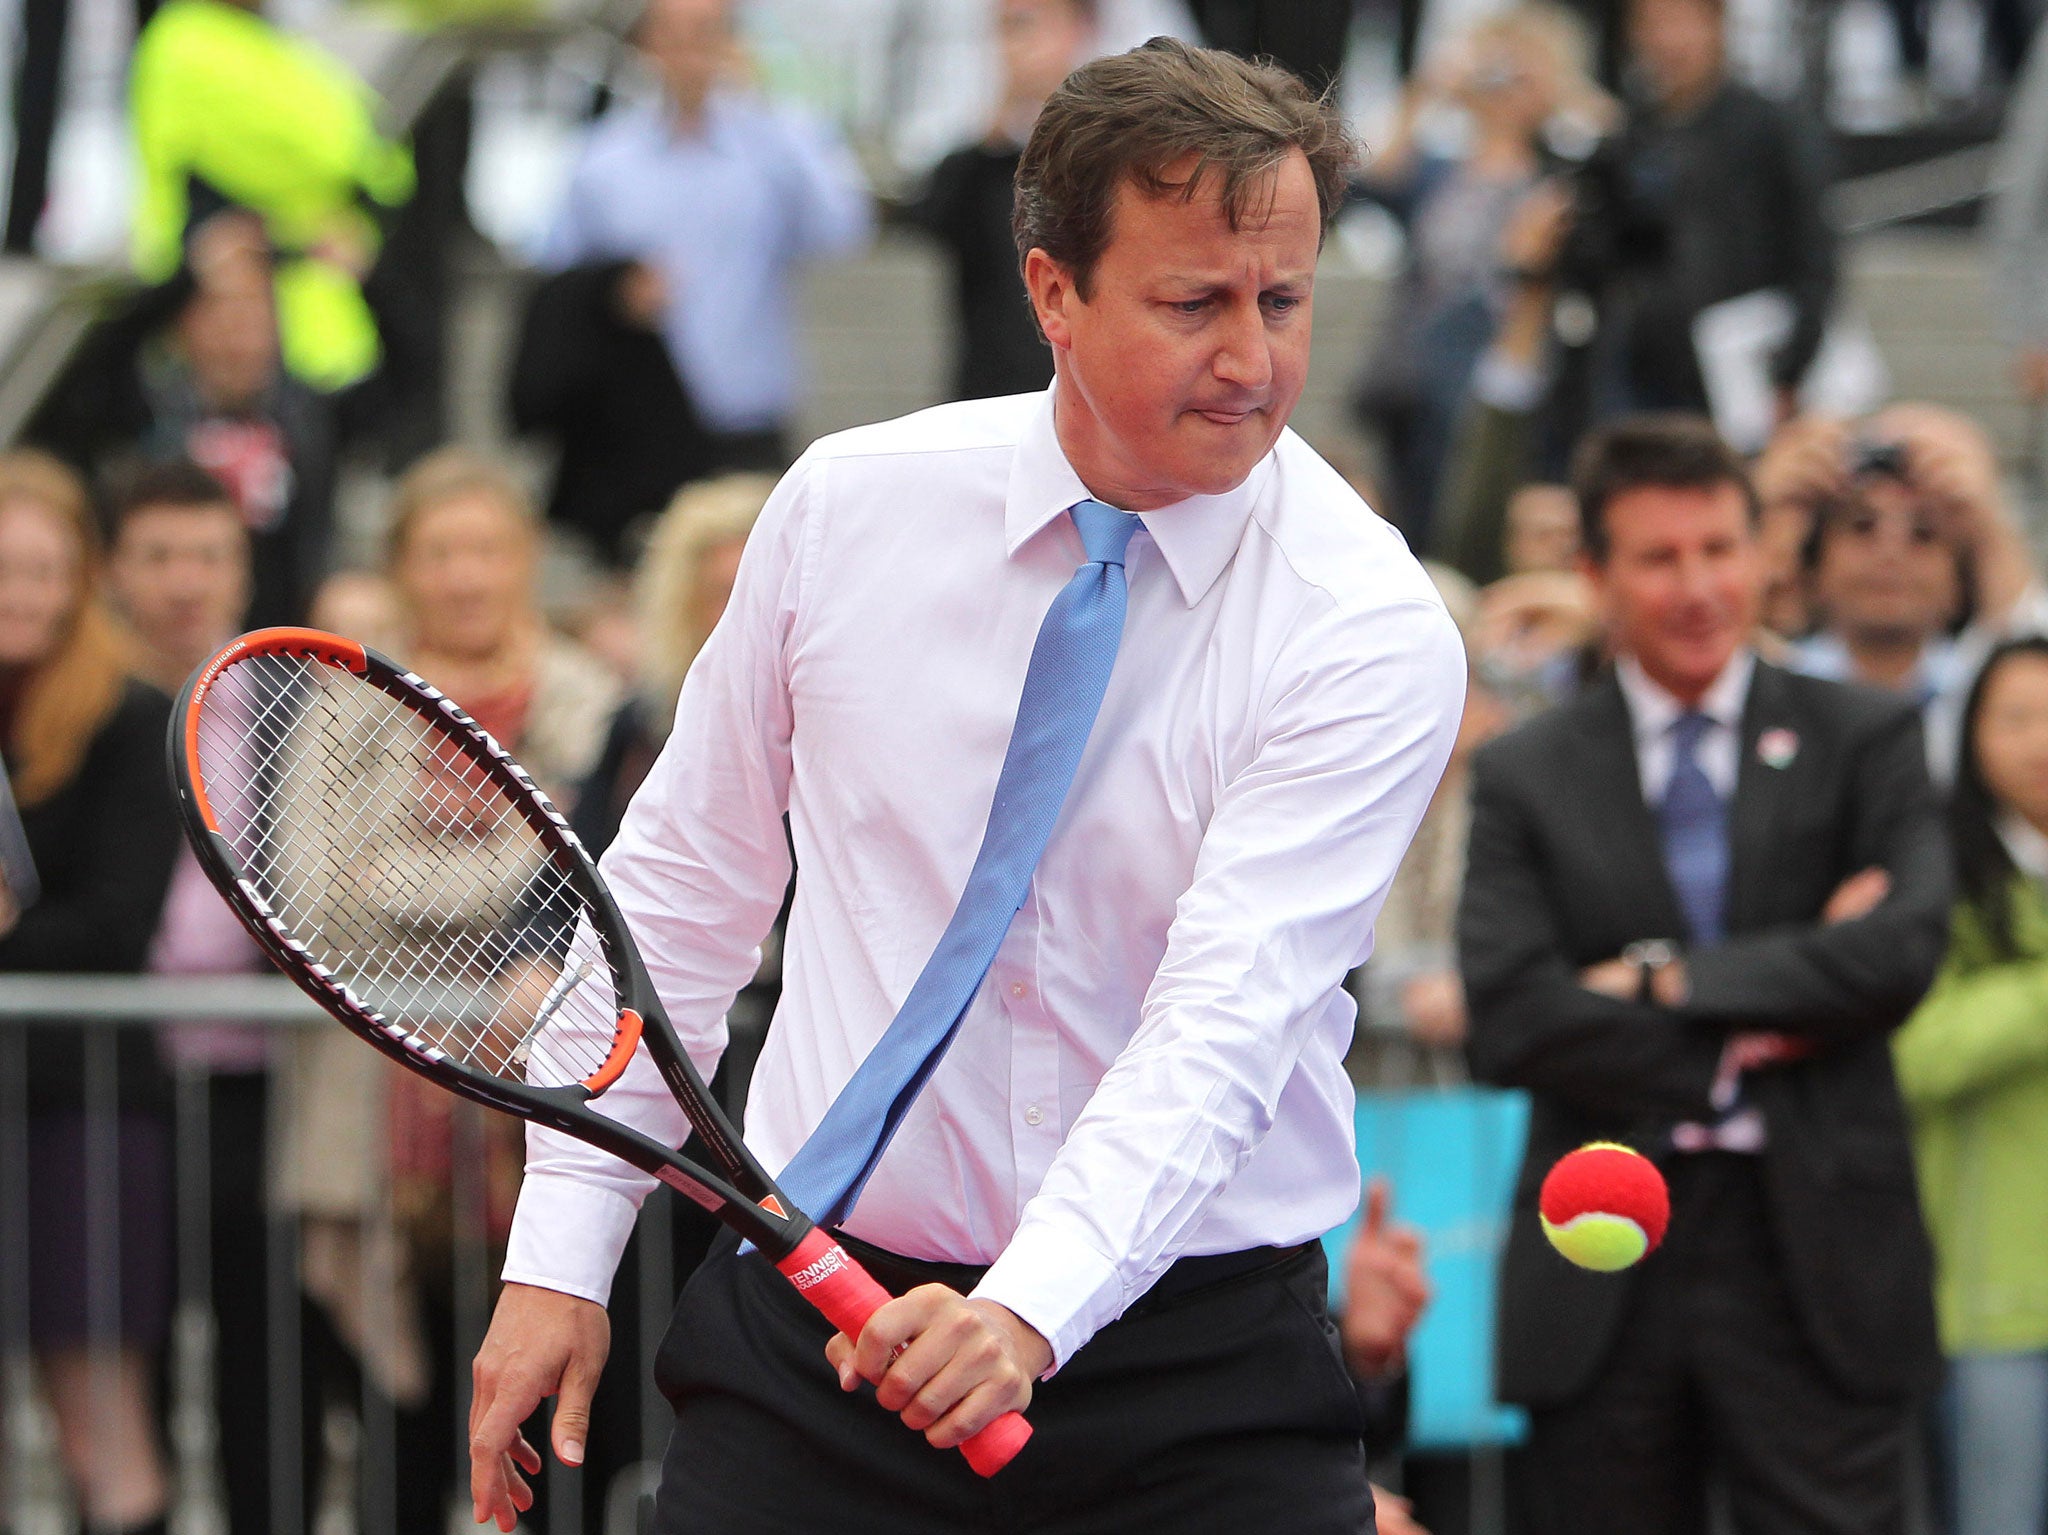 Prime Minister David Cameron plays tennis during the International Paralympic Day at Trafalgar Square on September 8, 2011 in London, England.